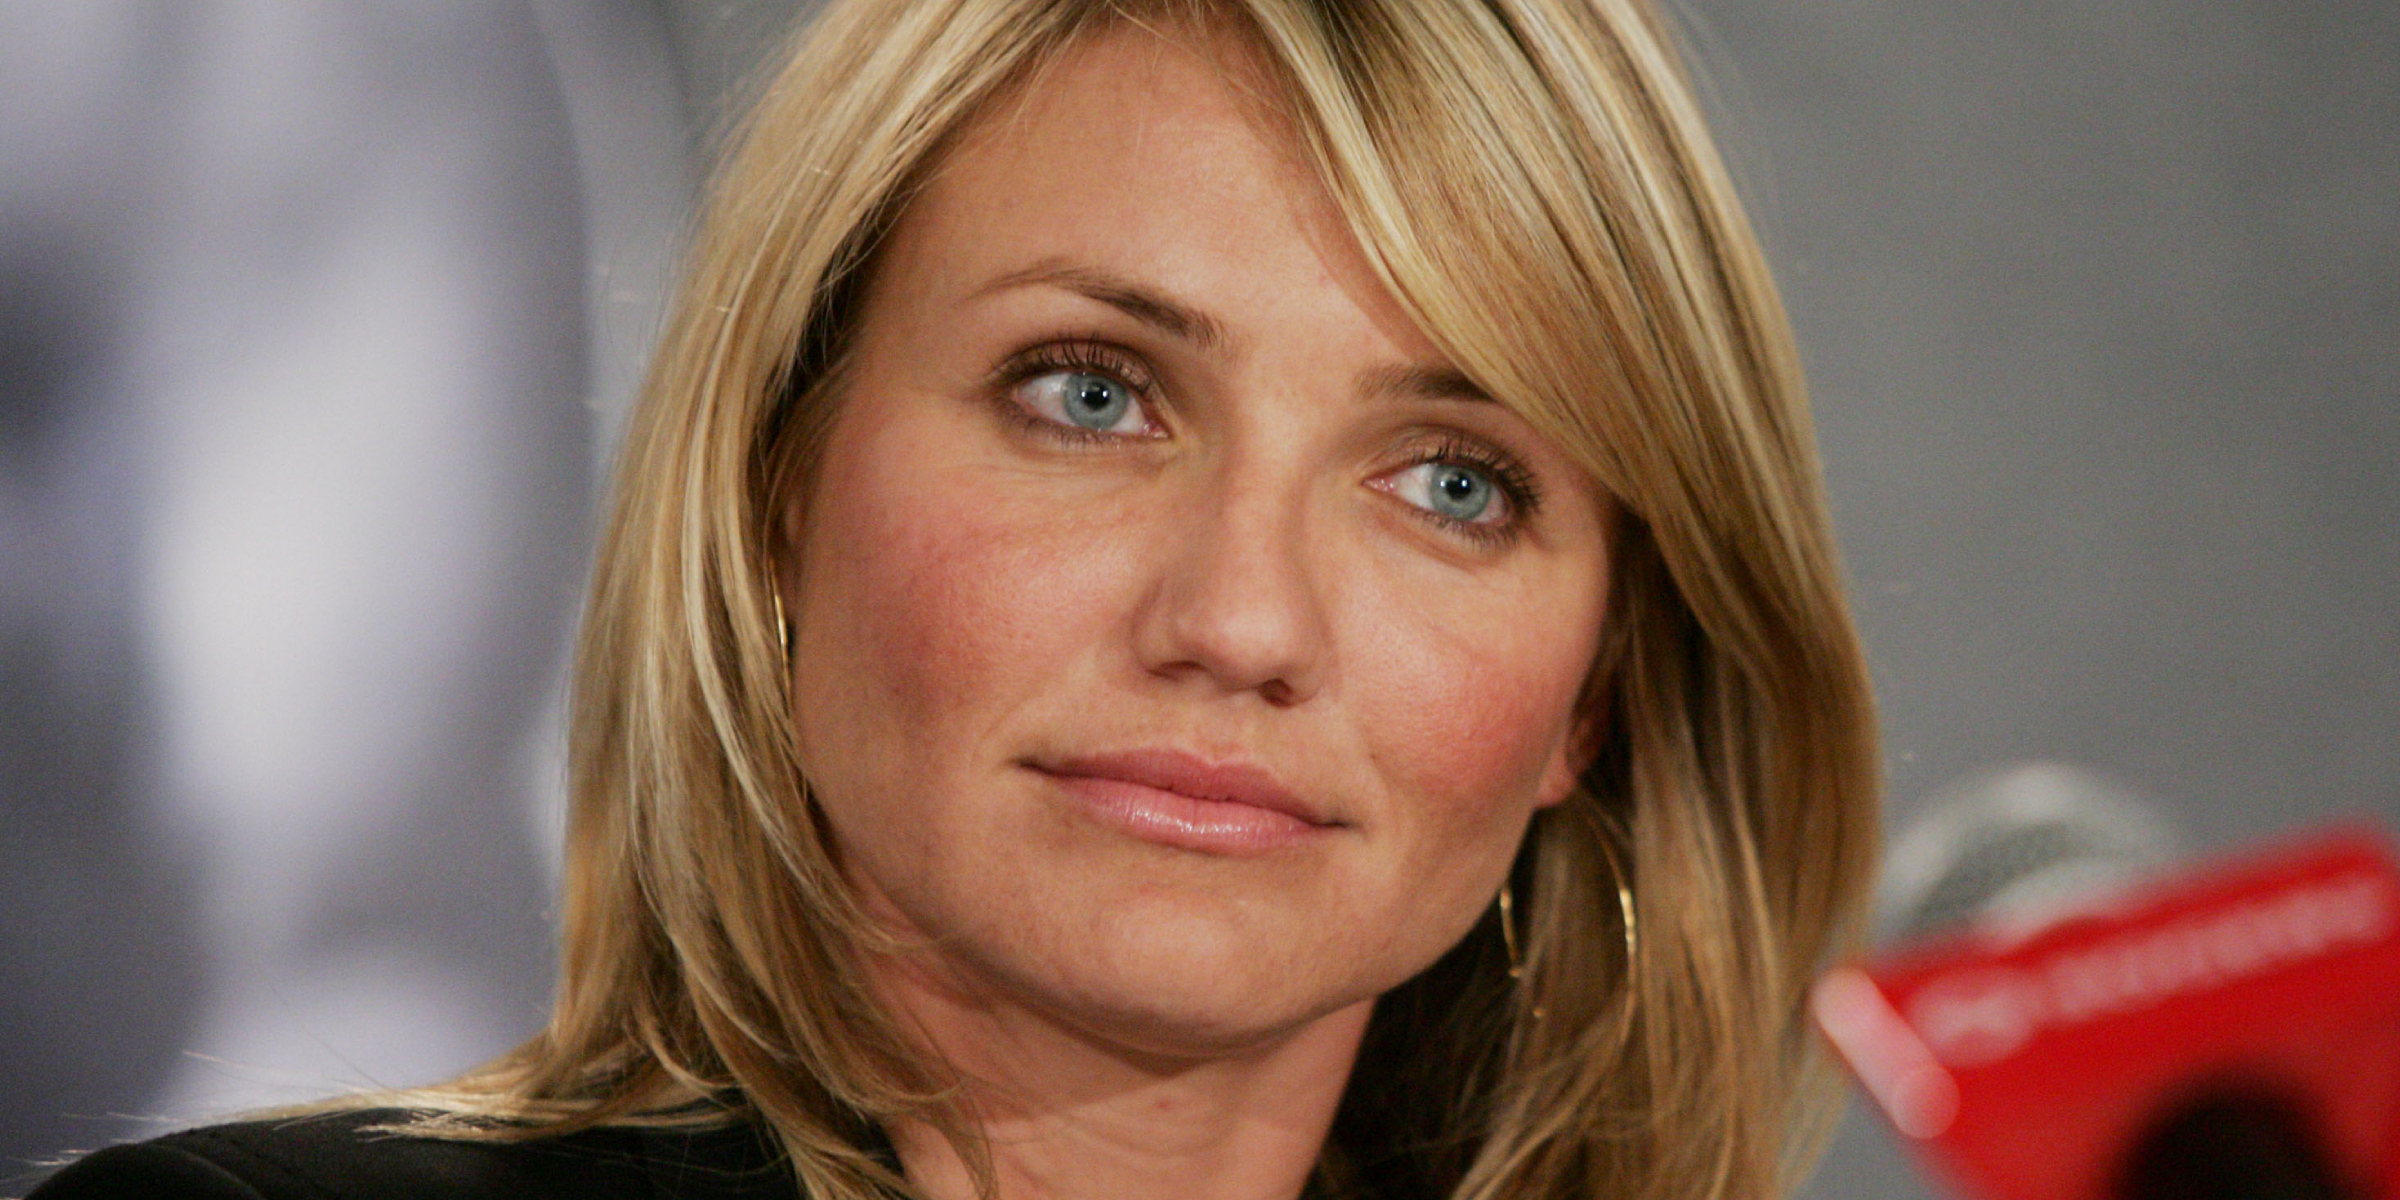 Cameron Diaz | Source : Getty Images